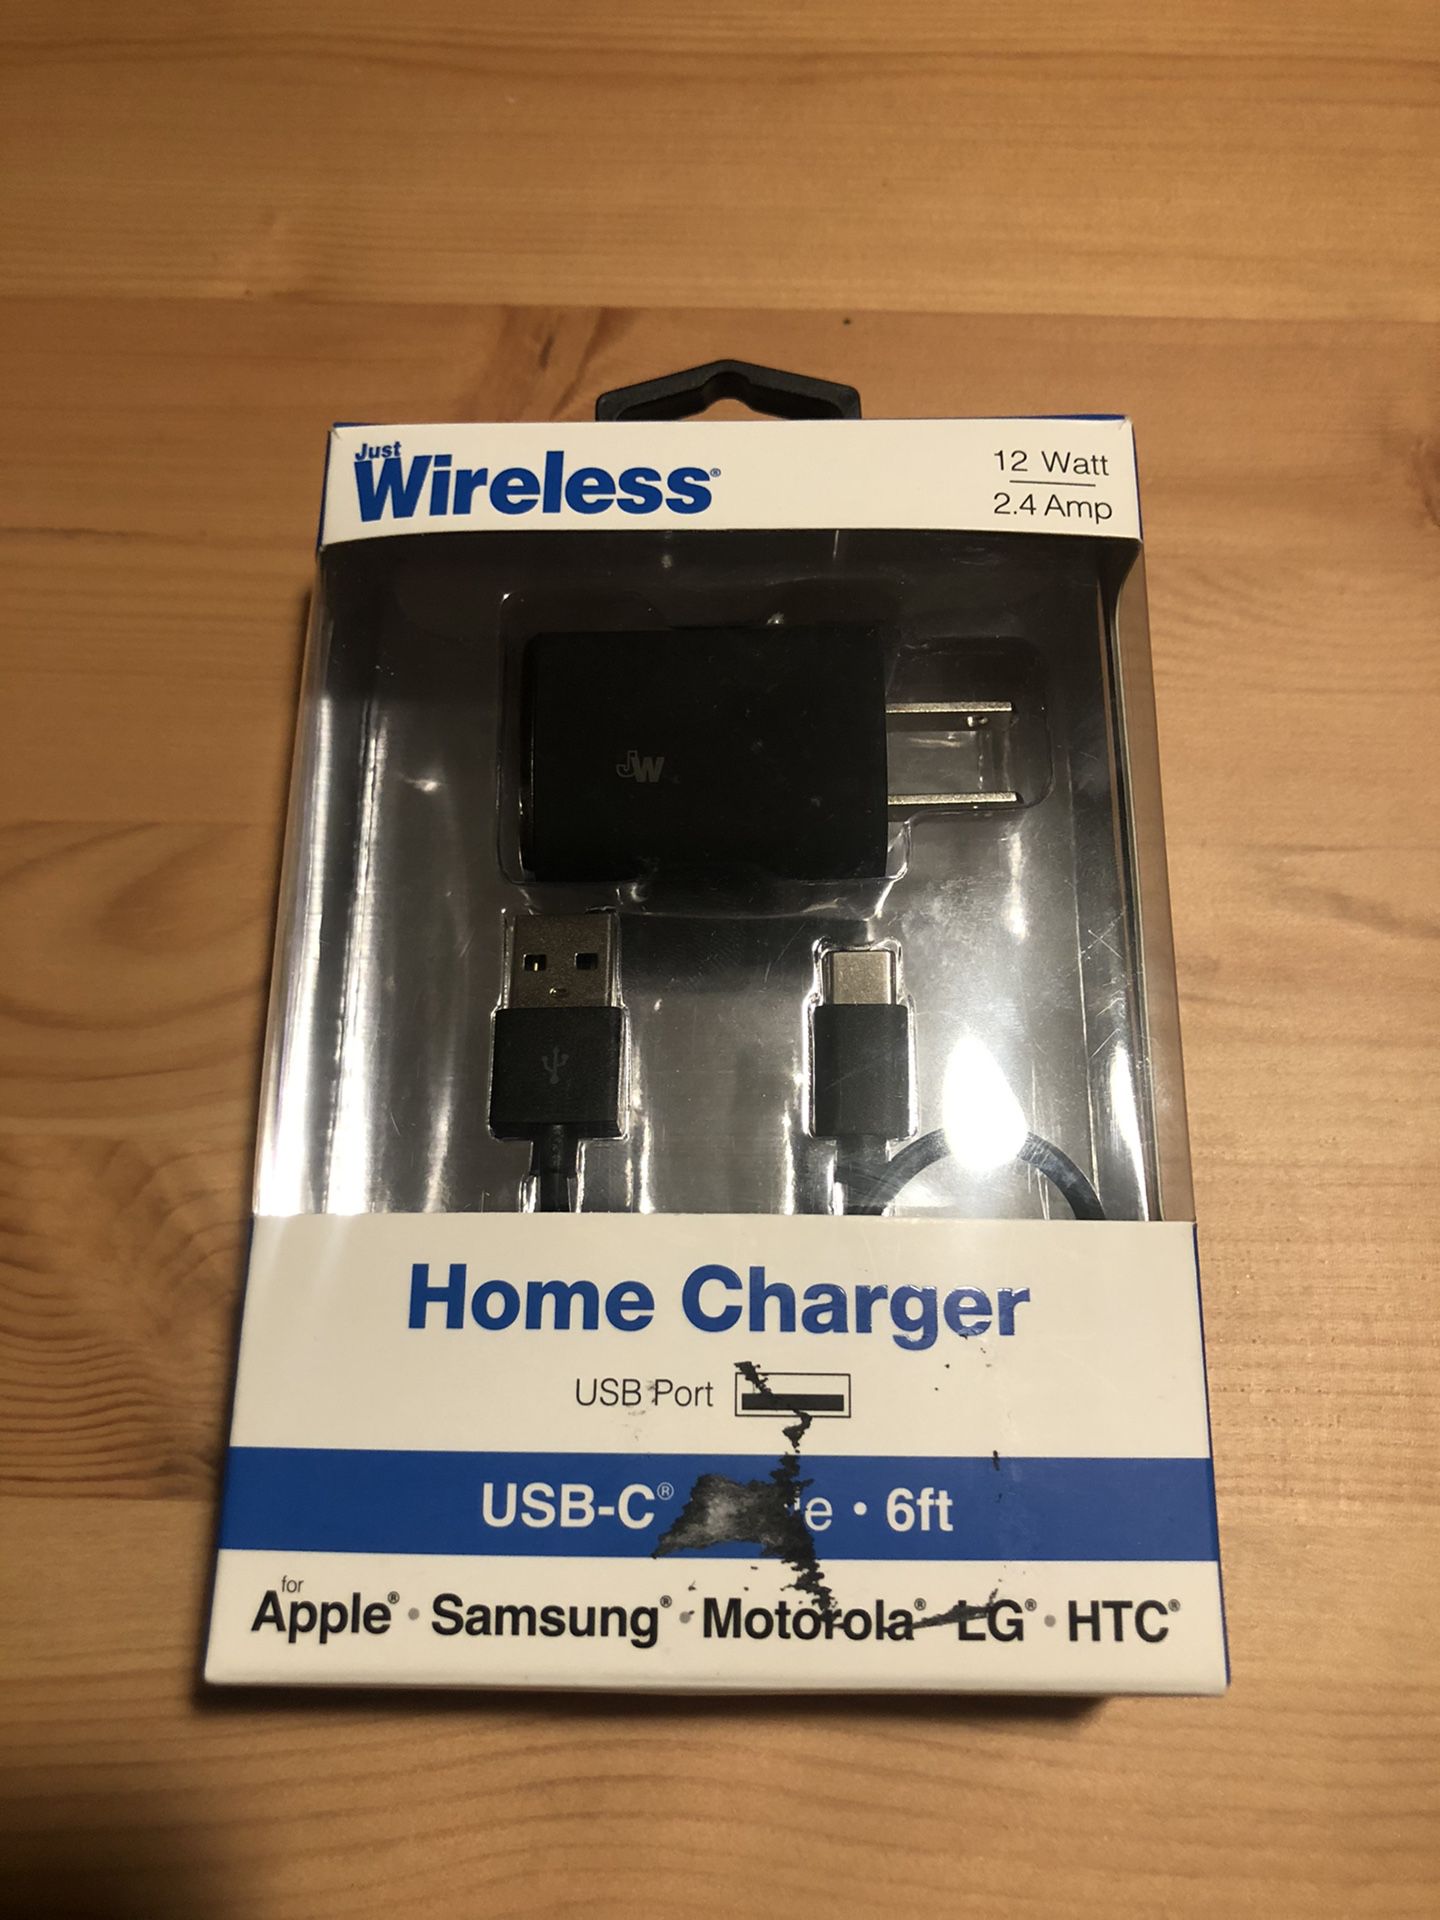 Just Wireless Home Charger